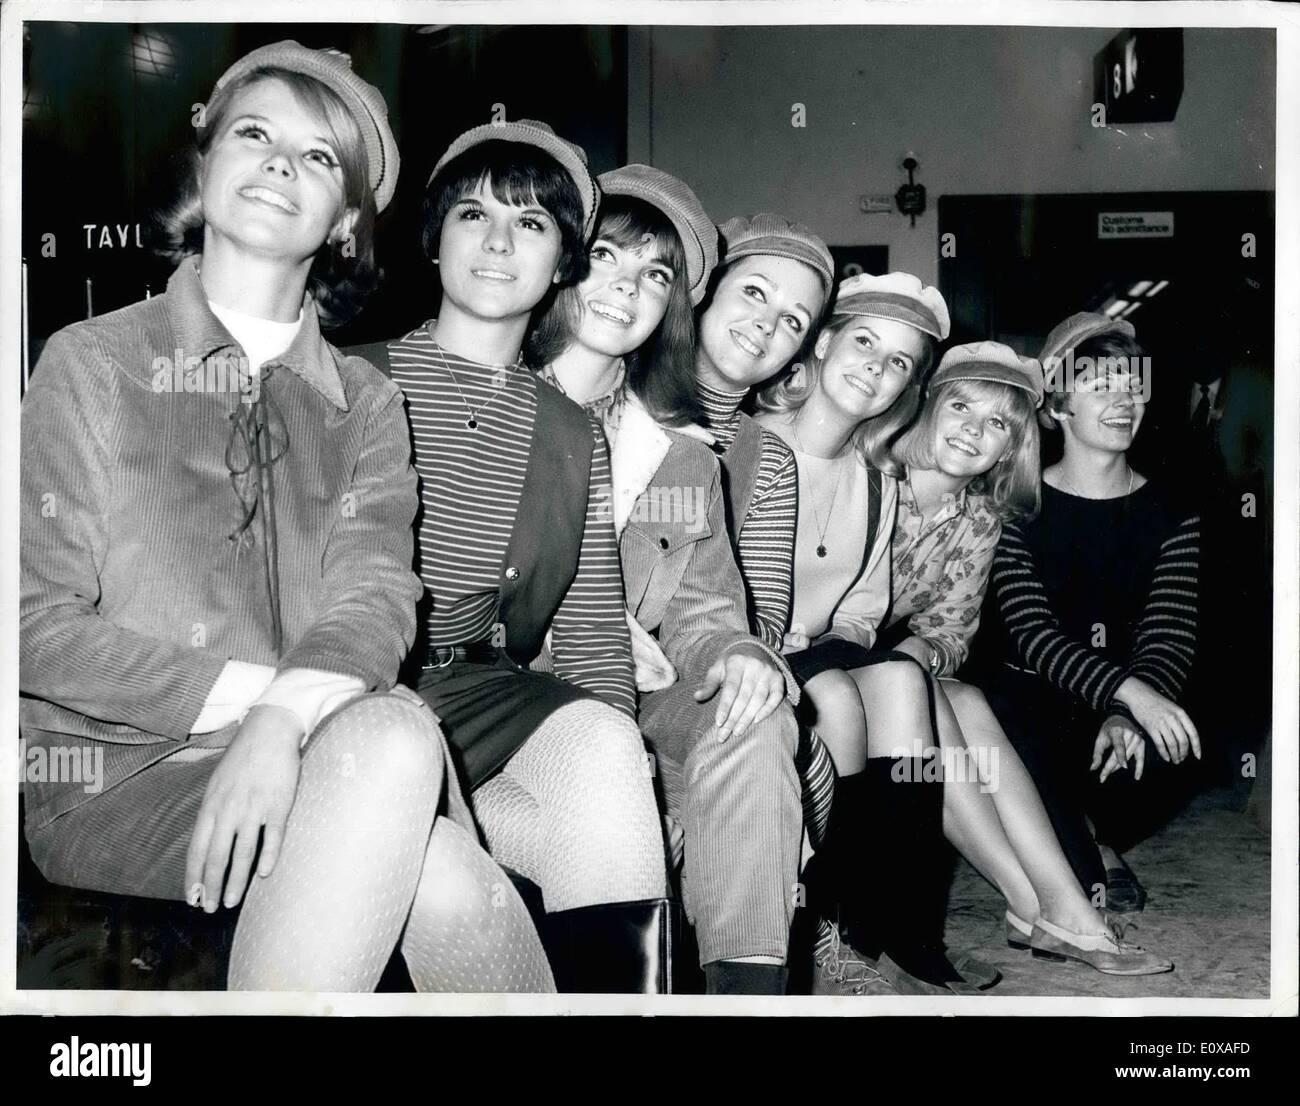 Jan. 01, 1966 - The Jantzen smile girls - arrive in London. Seven American girls - winners of the Jantzen ''Smile Contest'' - arrived in London last evening - continuing their tour of Europe - part of their prize - boosting the company's sales campaign.. The girls are here for four days - and they came from all parts of the United States.. Photo shows the lovely smiling young ladies - at London Airport last evening Stock Photo